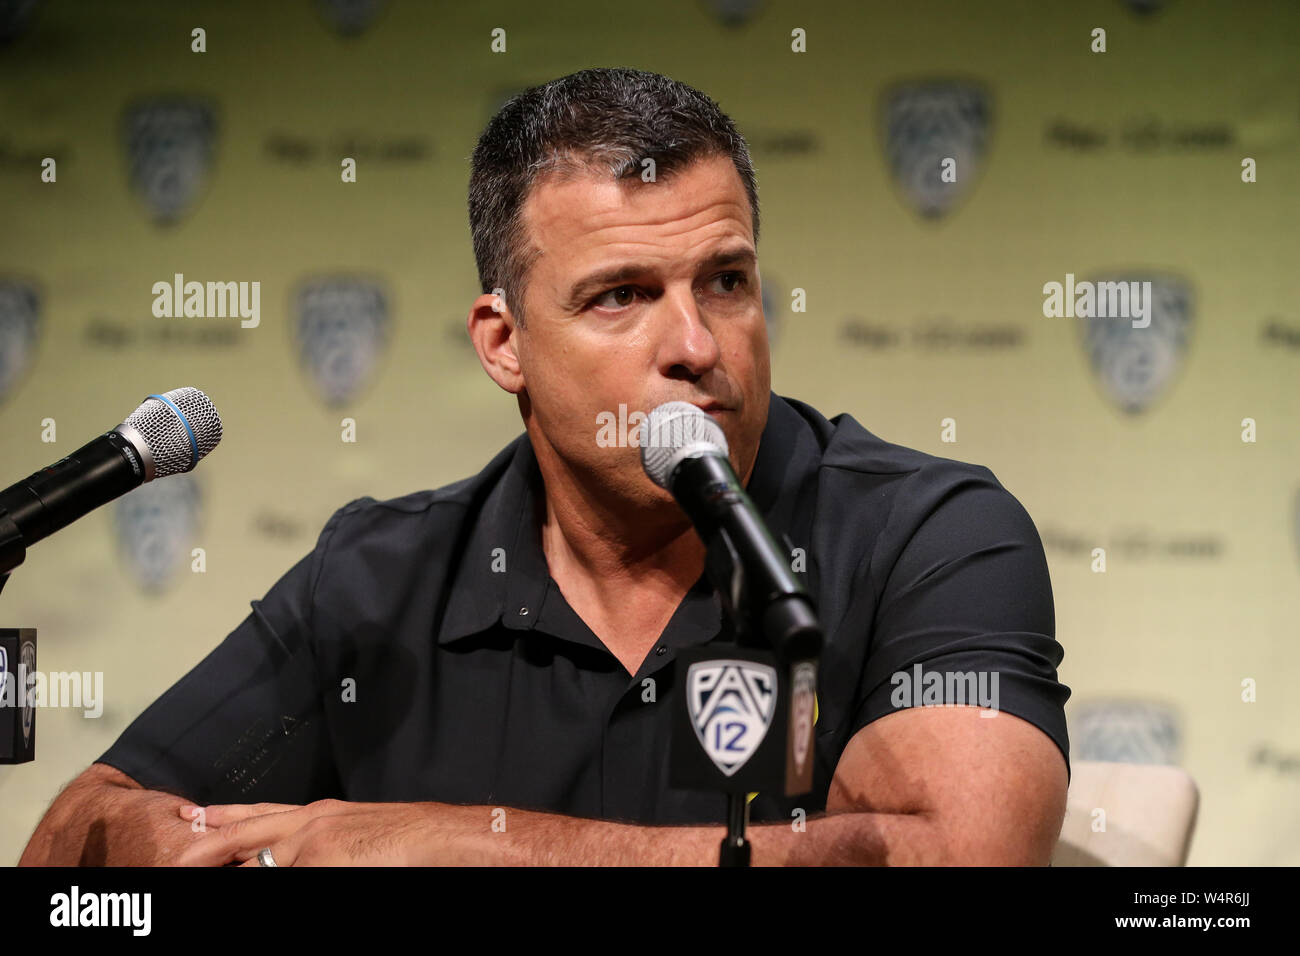 Hollywood CA. 24th July, 2019. Oregon Ducks coach Mario Cristobal during the PAC-12 Media Day at the Ray Dolby Ballroom located within Hollywood & Highlands (Photo by Jevone Moore) Credit: csm/Alamy Live News Stock Photo